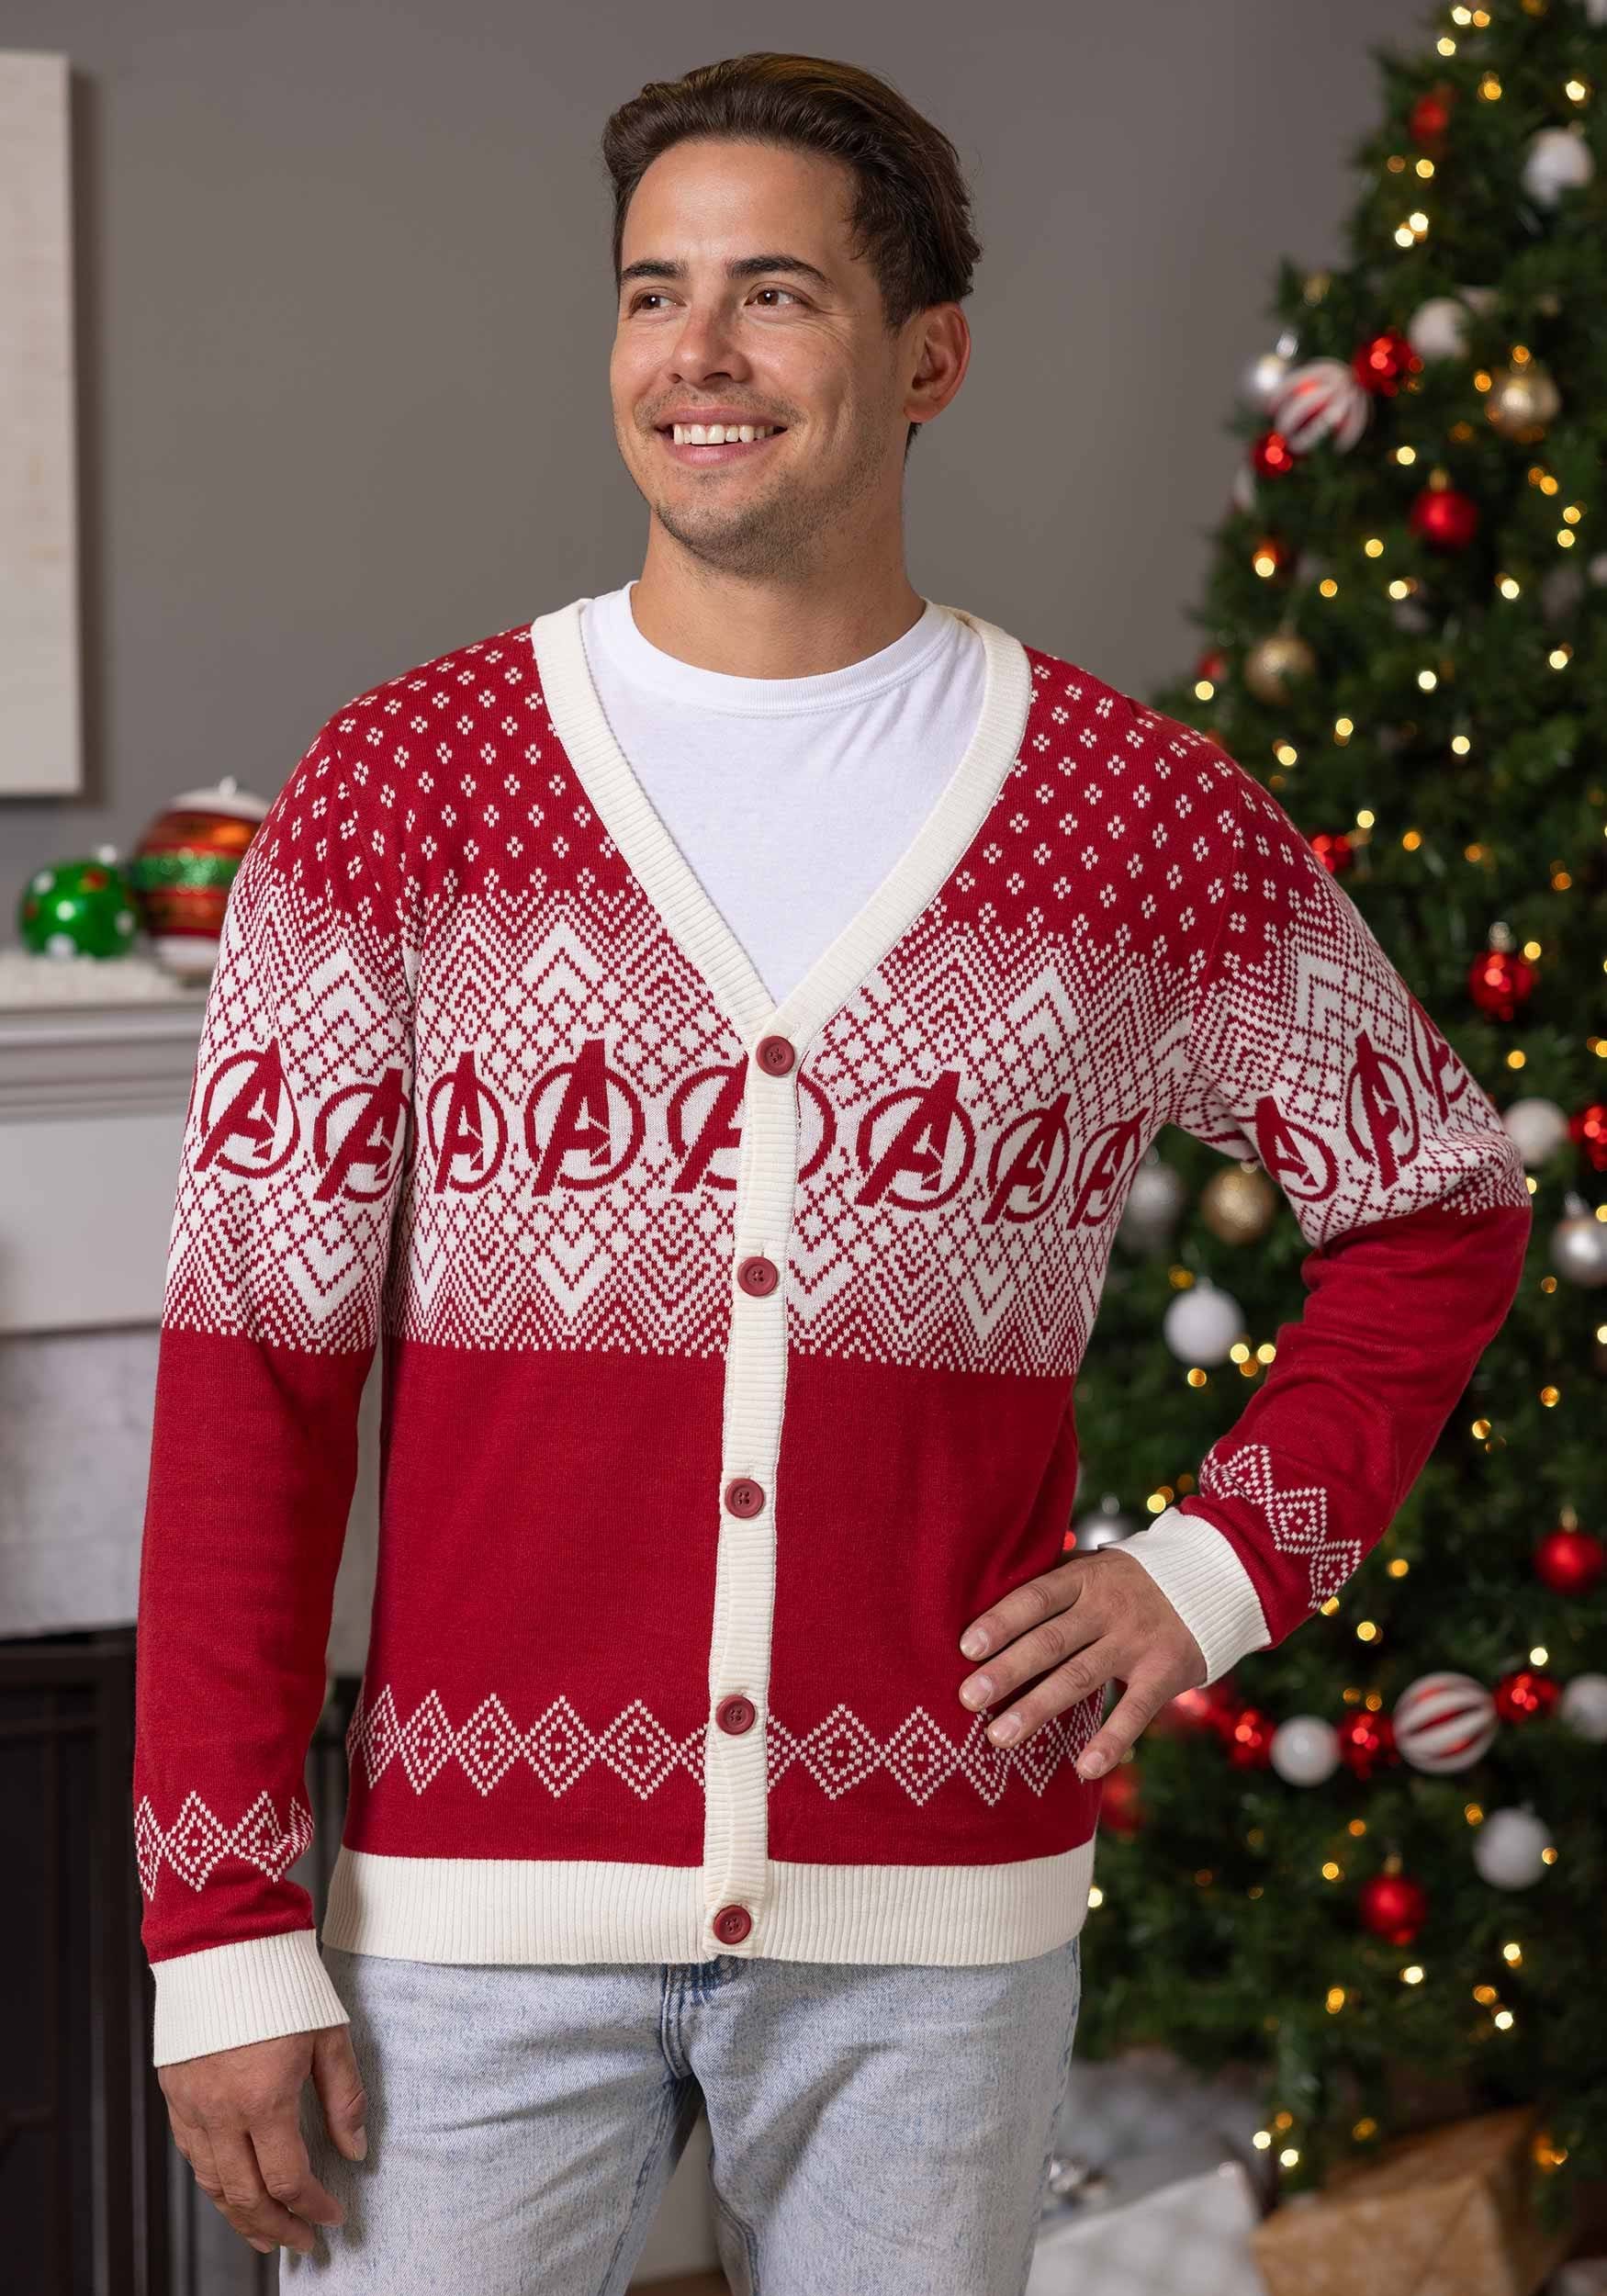 Marvel Avengers Ugly Christmas Cardigan Sweater For Adults